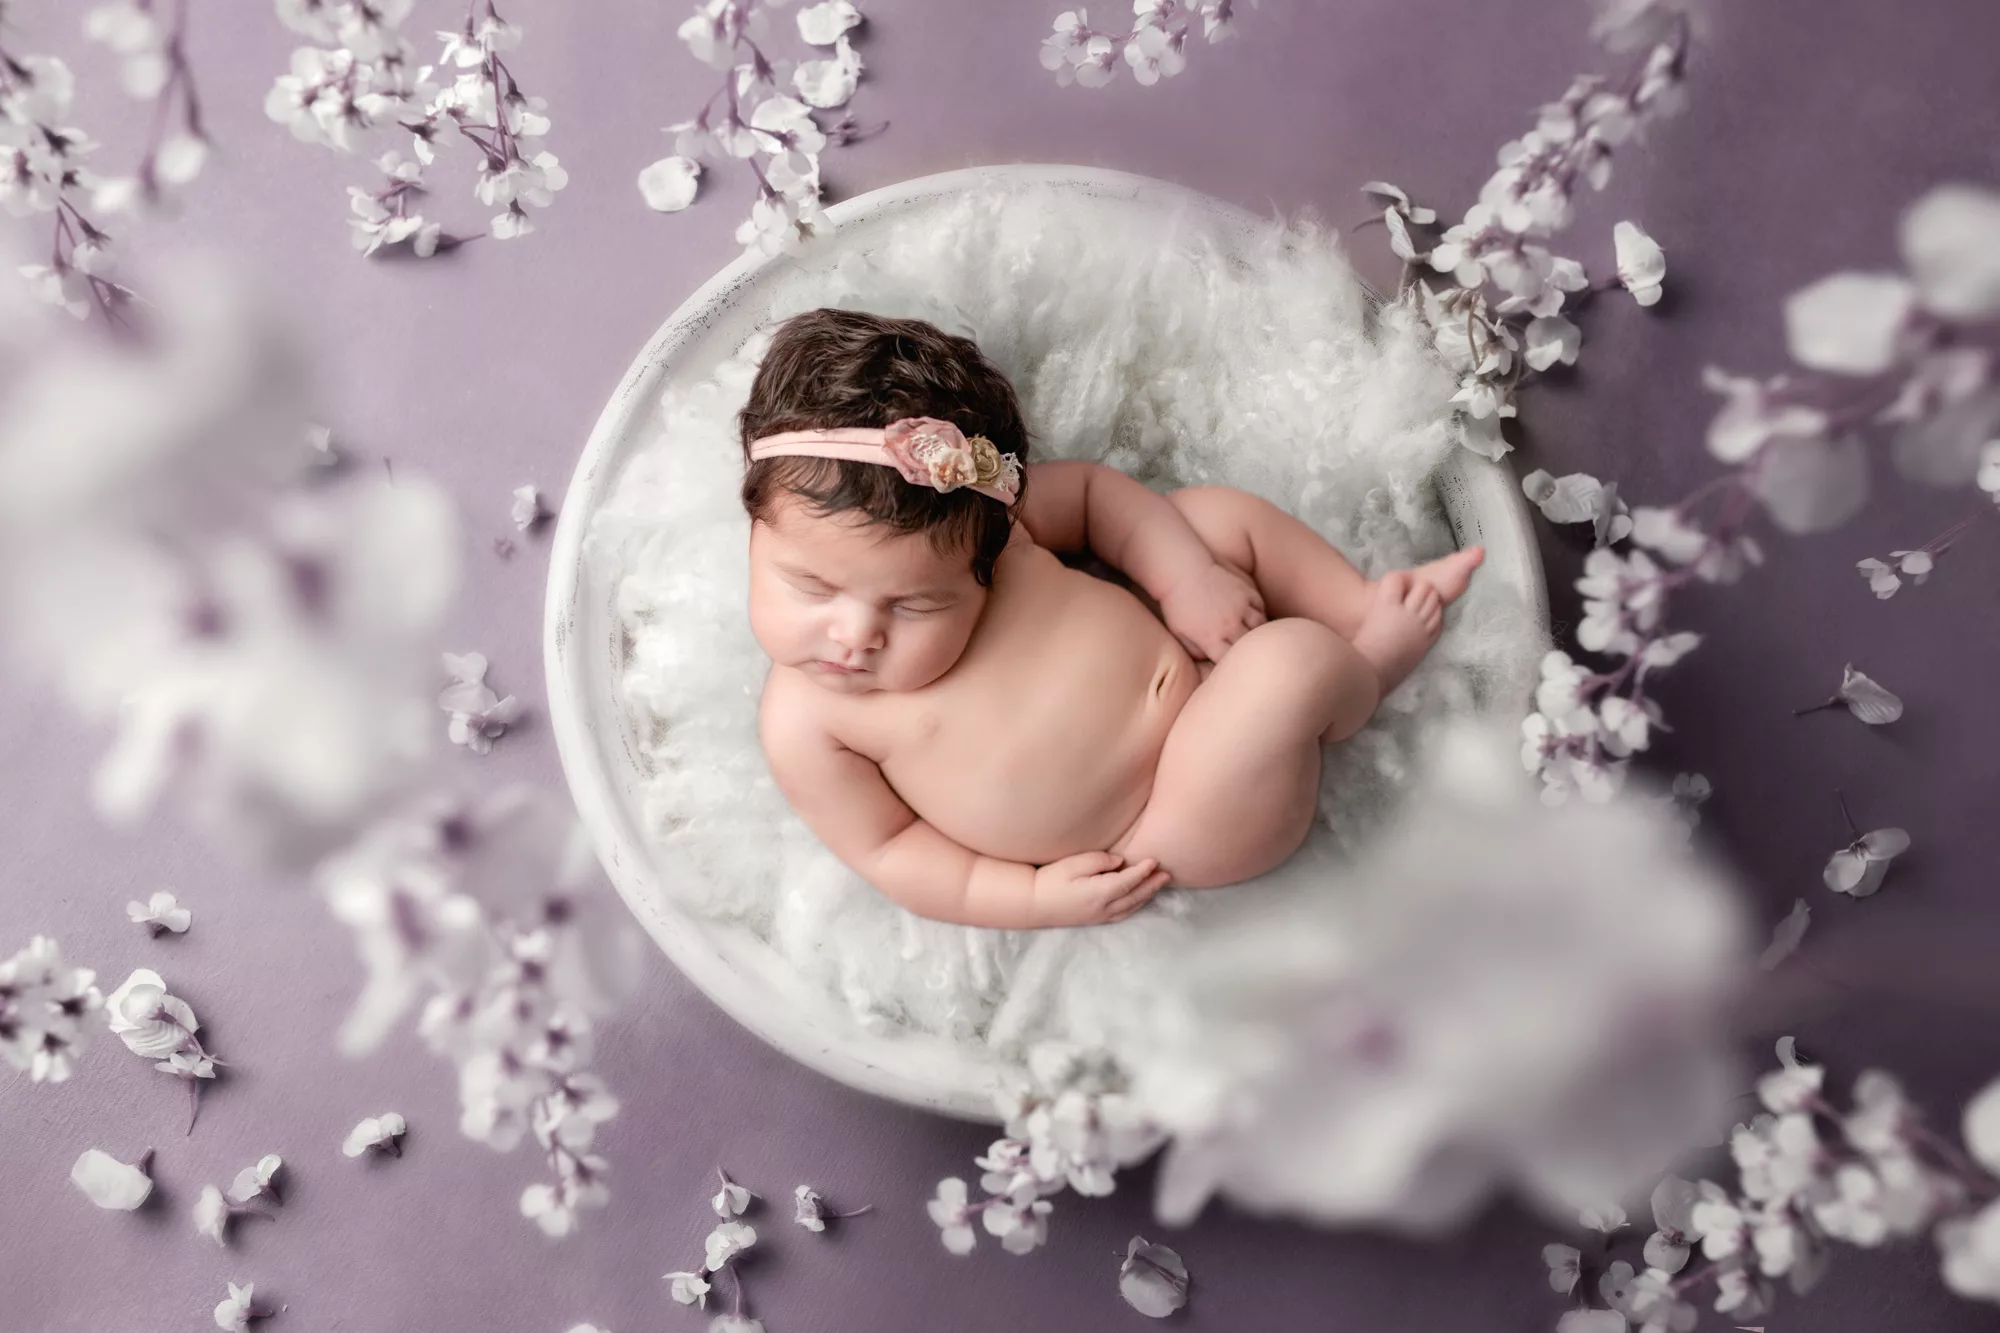 Picture of a newborn girl laying curled up in a white bowl with white fluff surrounded by white floral coming down from the ceiling